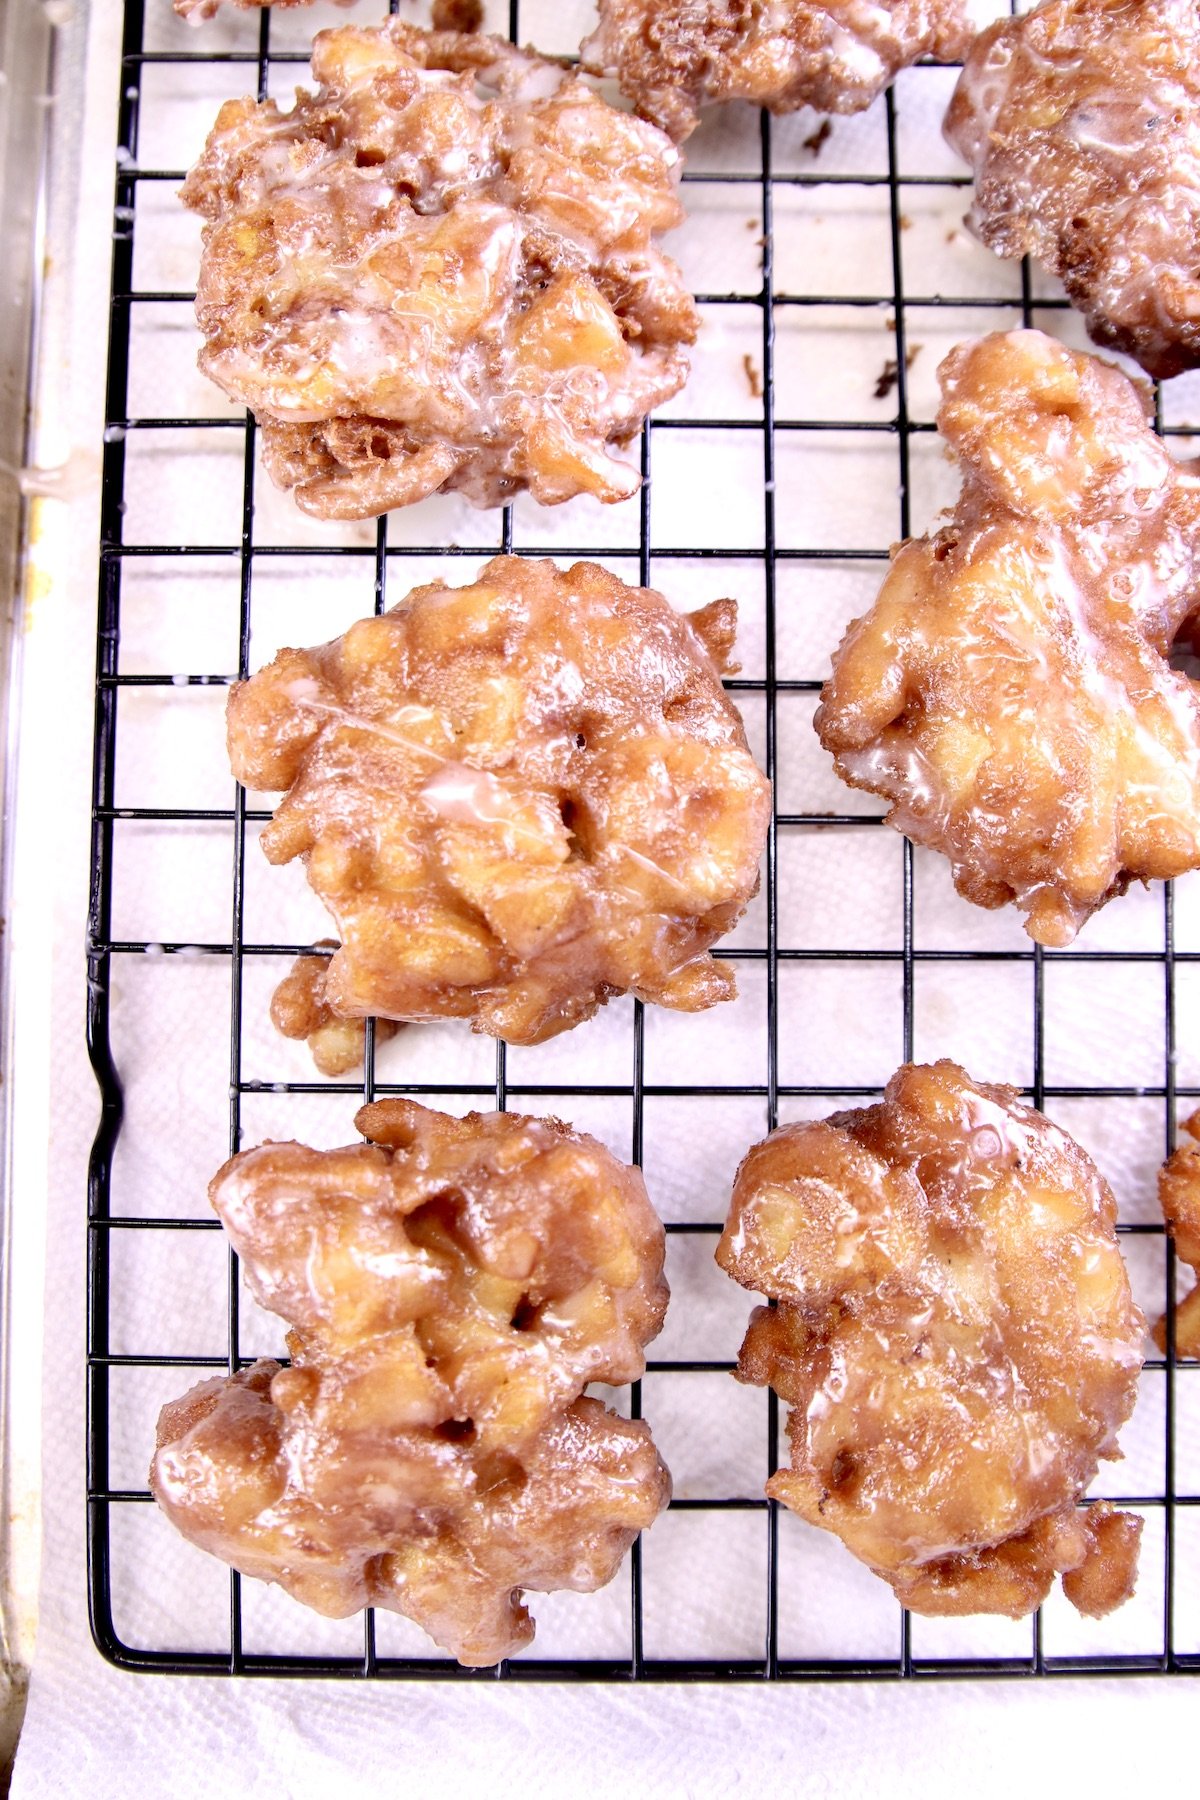 Glazed apple fritters on a wire rack